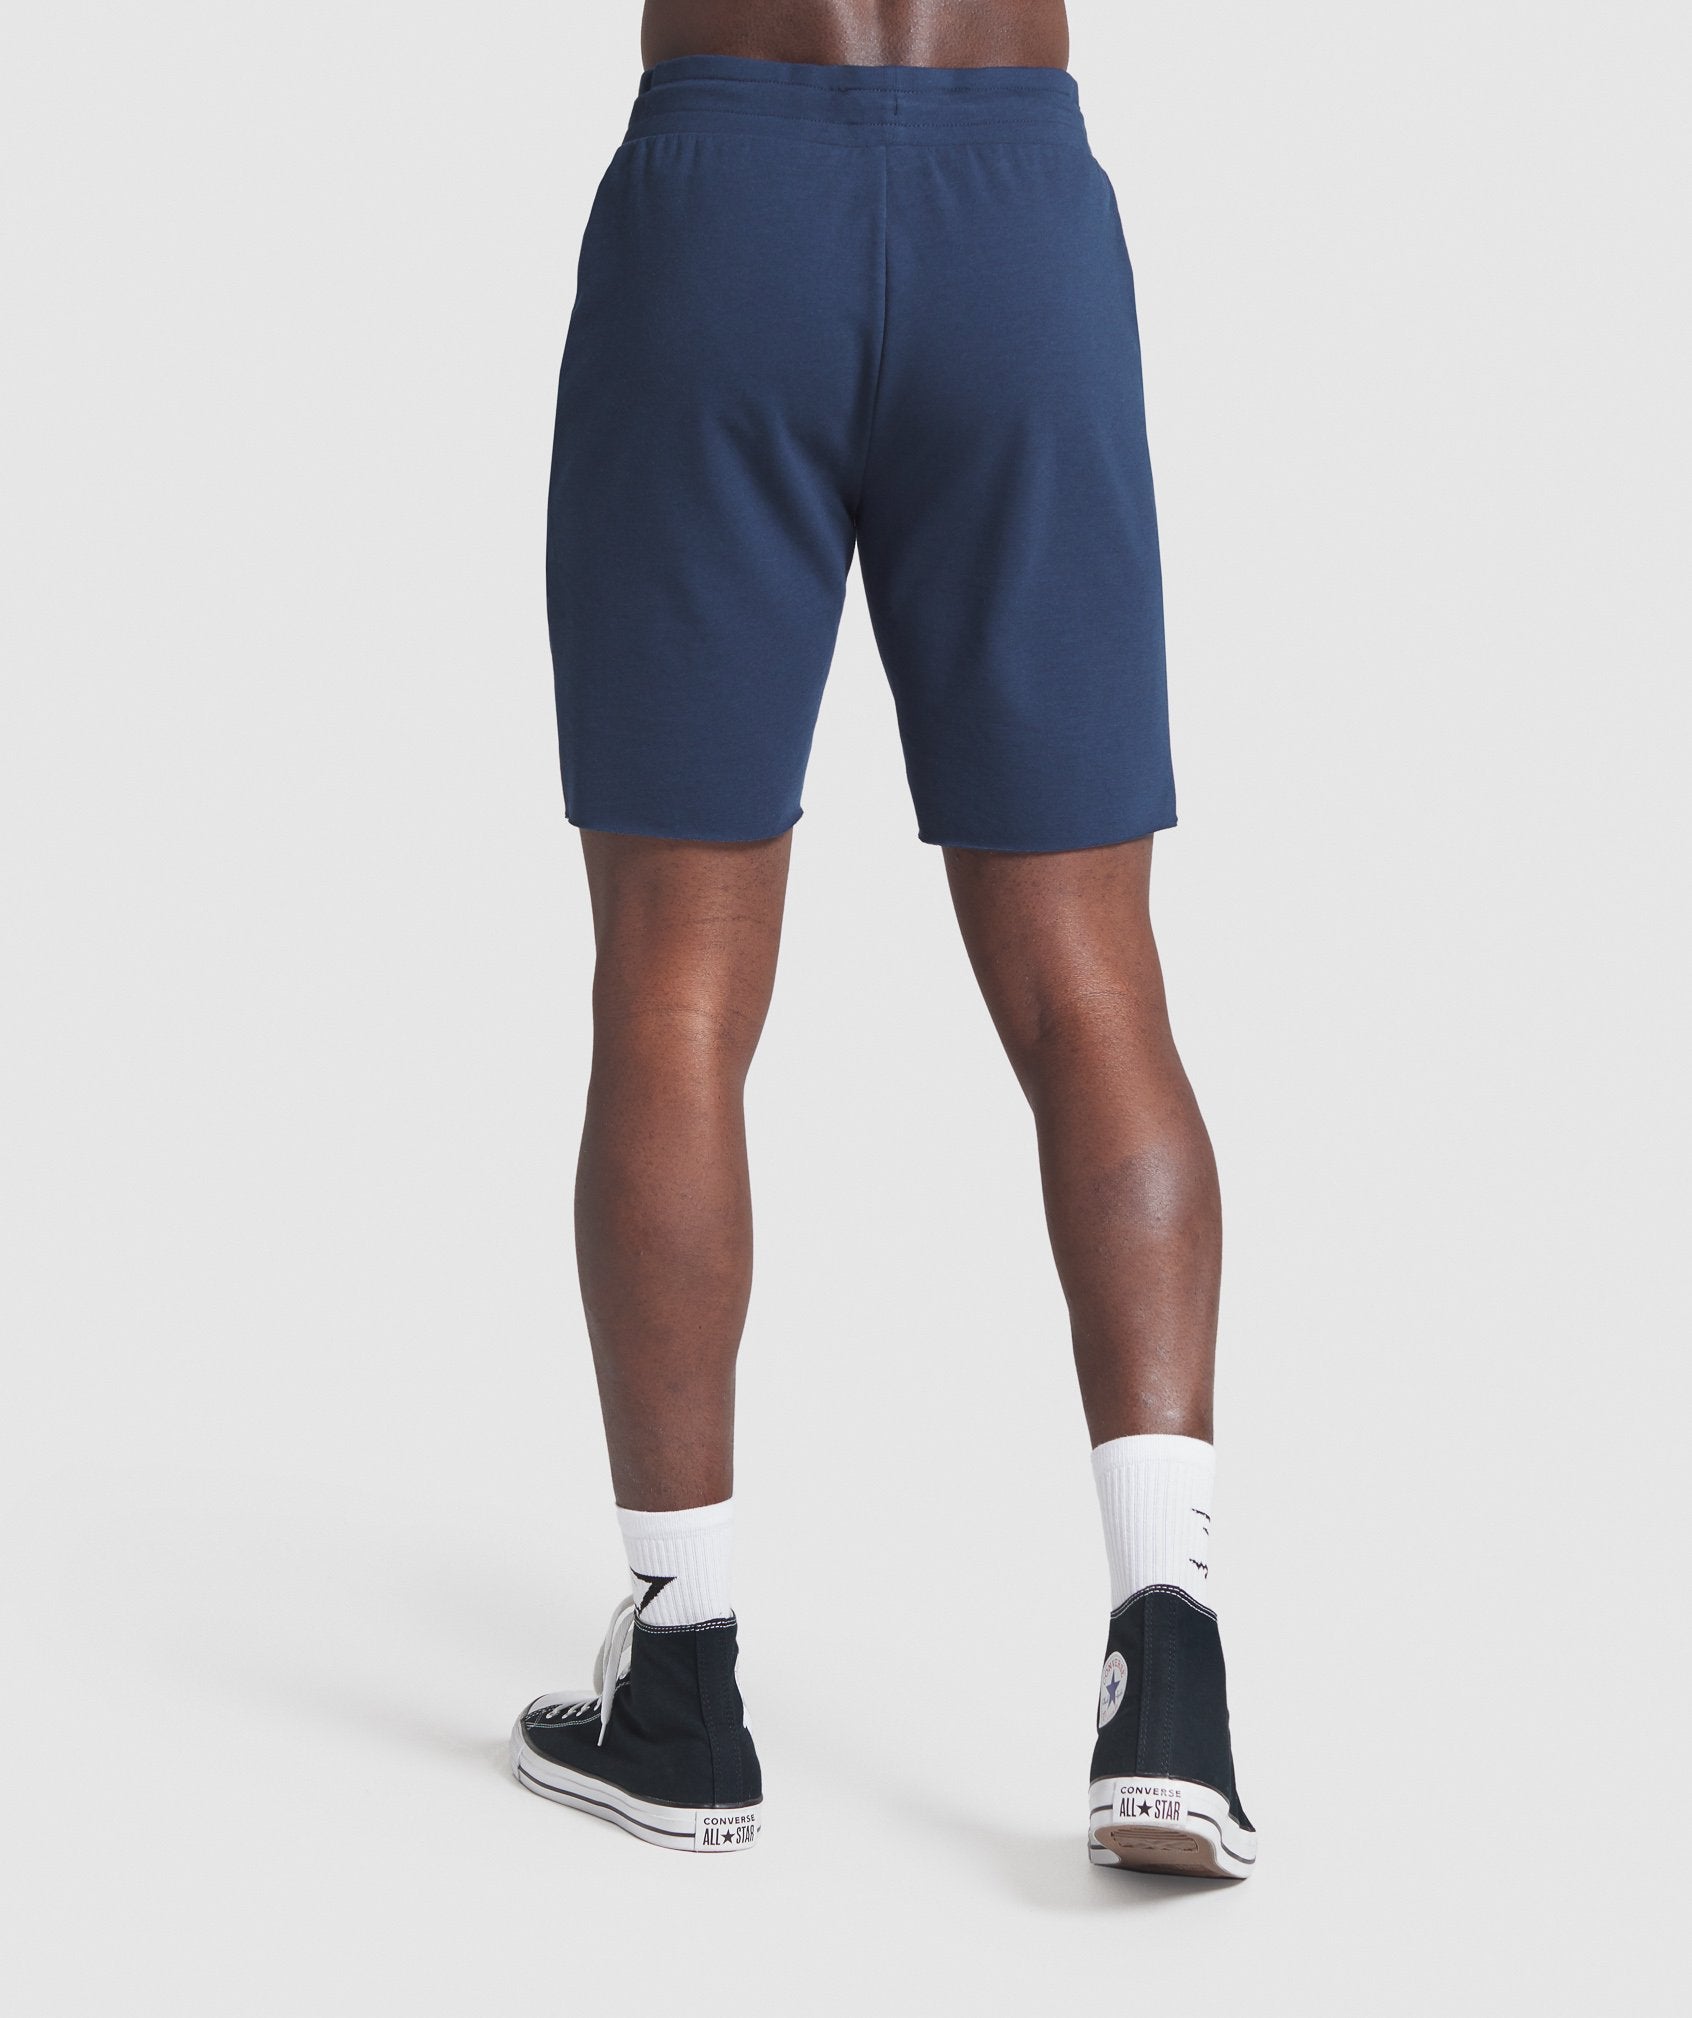 Critical 9" Shorts in Navy